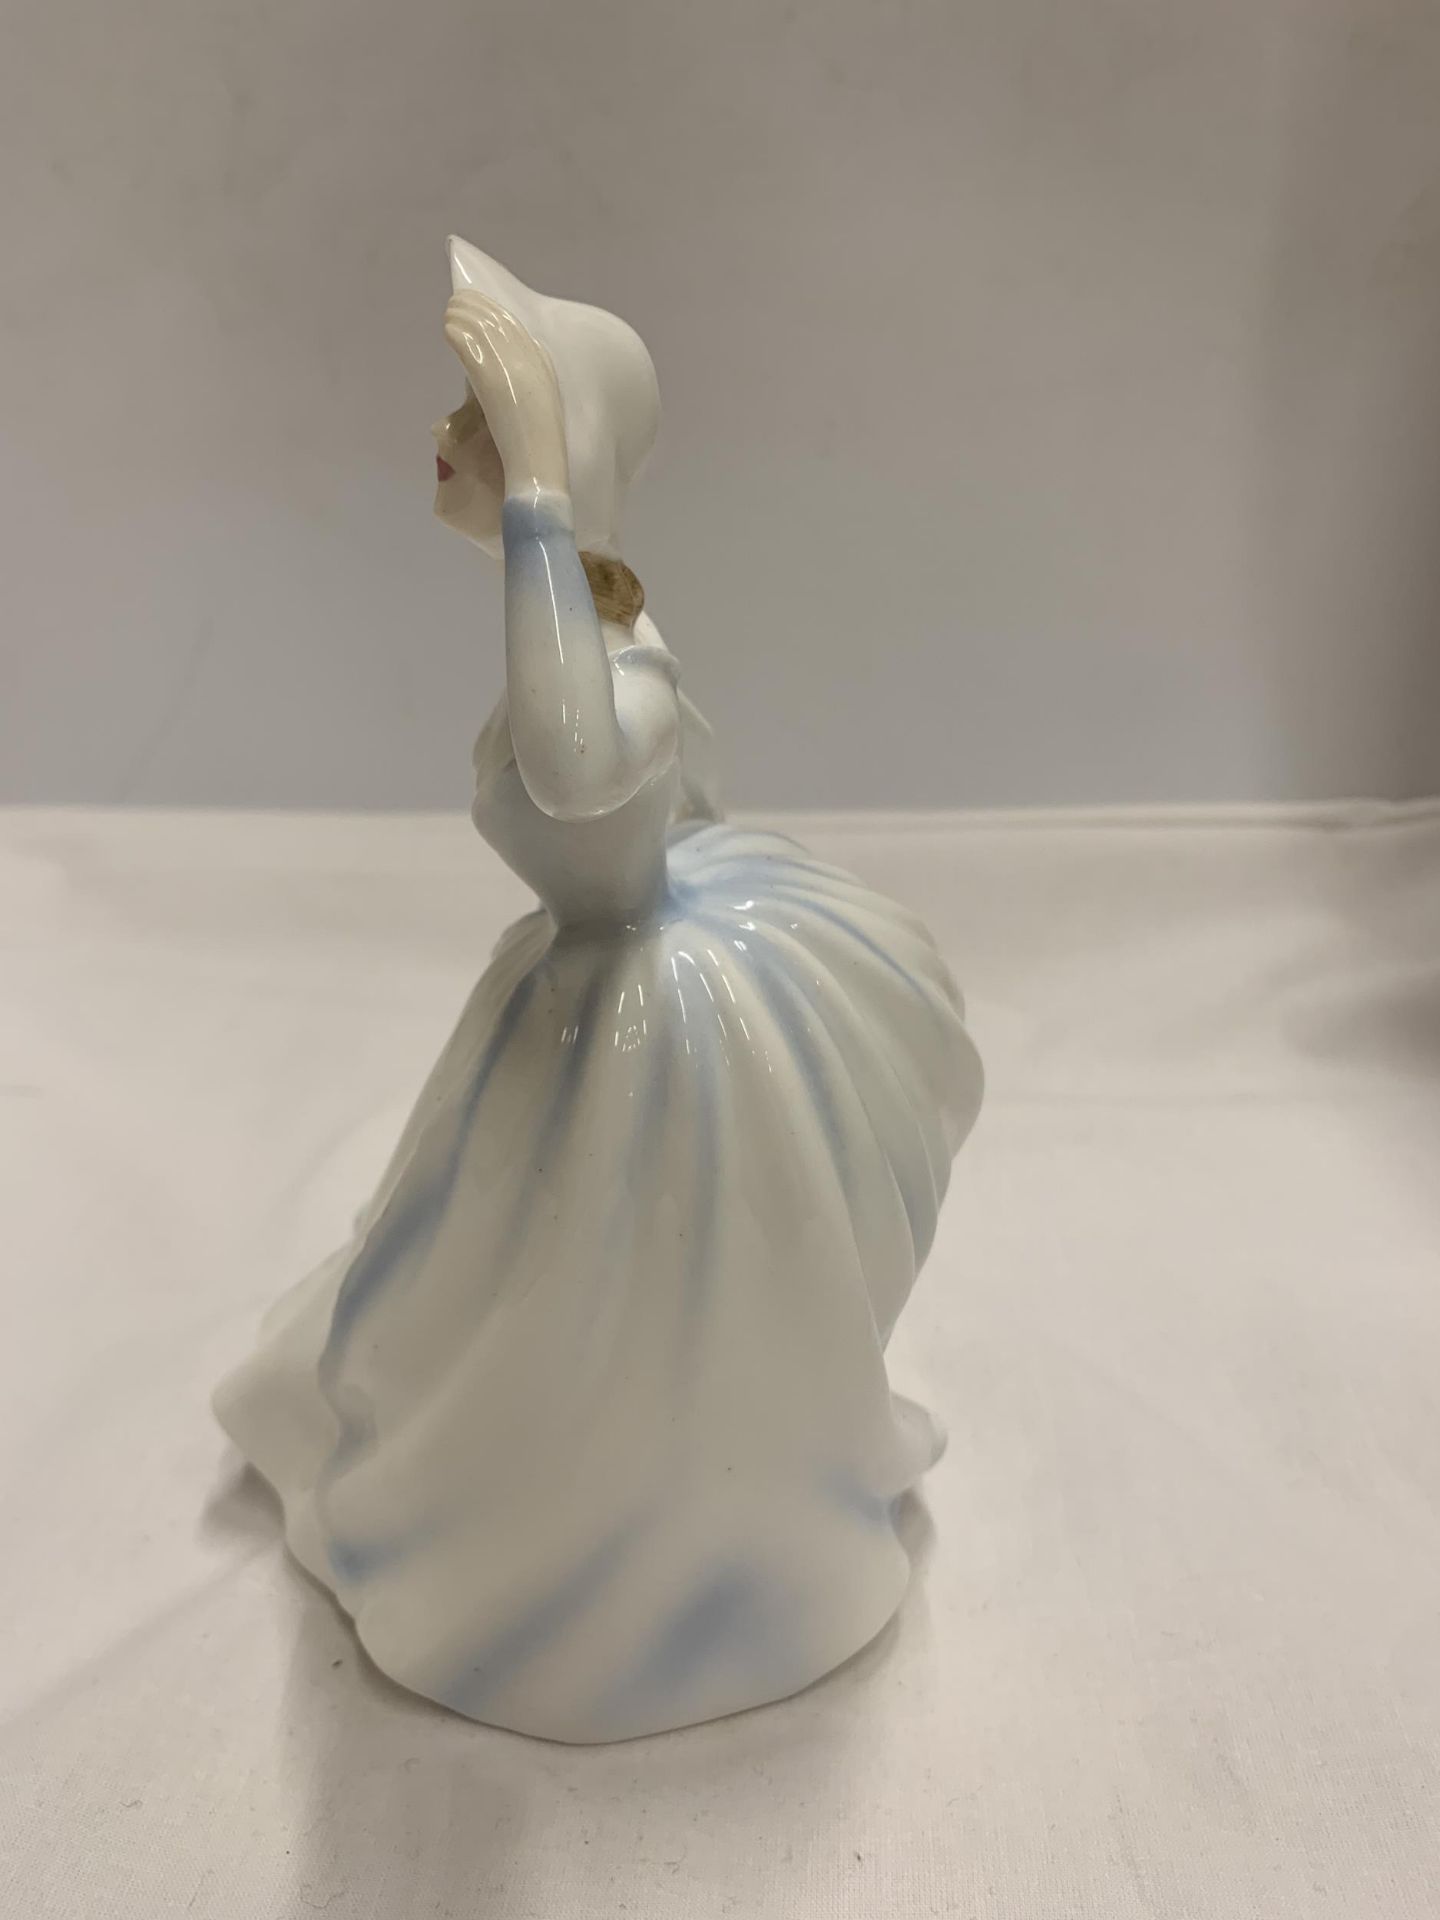 A ROYAL DOULTON LADY FIGURE IN BLUE DRESS - Image 3 of 6